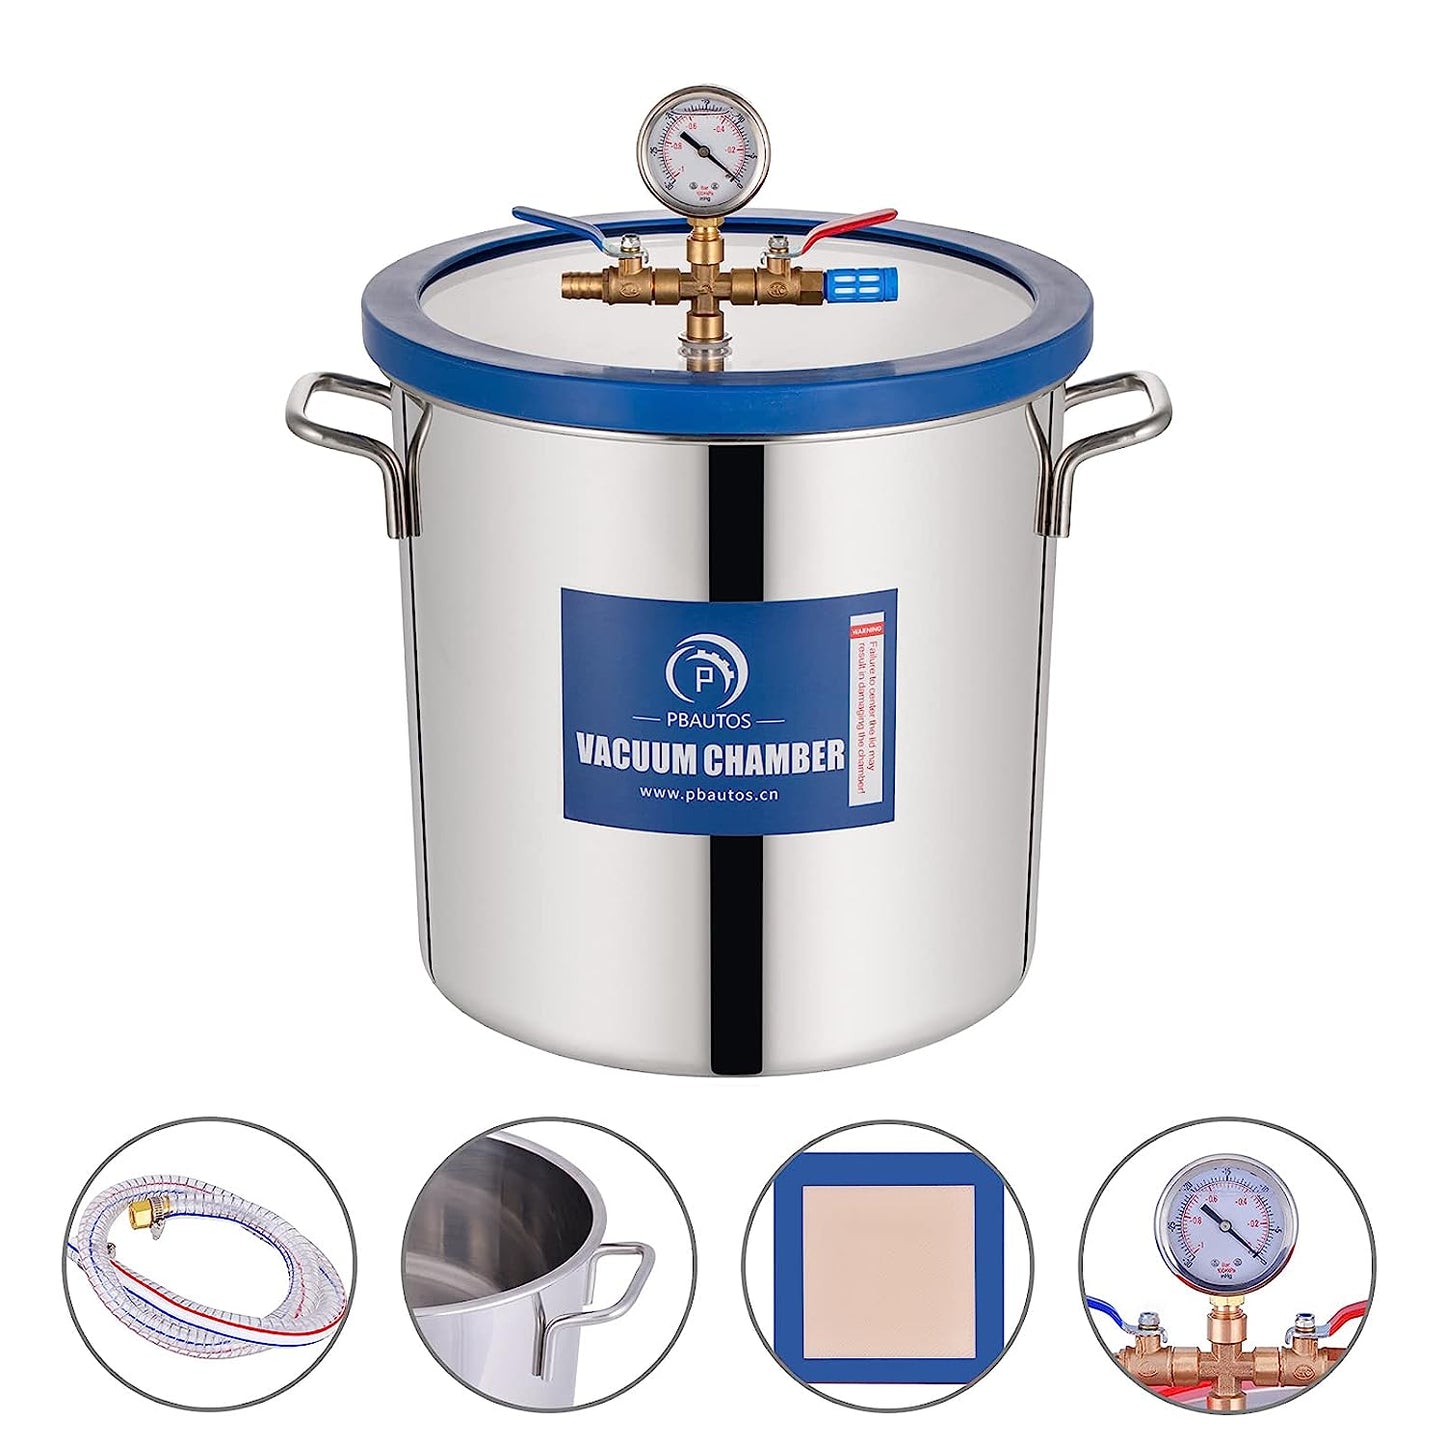 5 Gallon Vacuum Chamber, Stainless Steel Vacuum Degassing Chamber 18.92L, Degassing Chamber with Acrylic Crystal Lid for Resin Casting, Degassing Essential Oils, Not for Stabilizing Wood